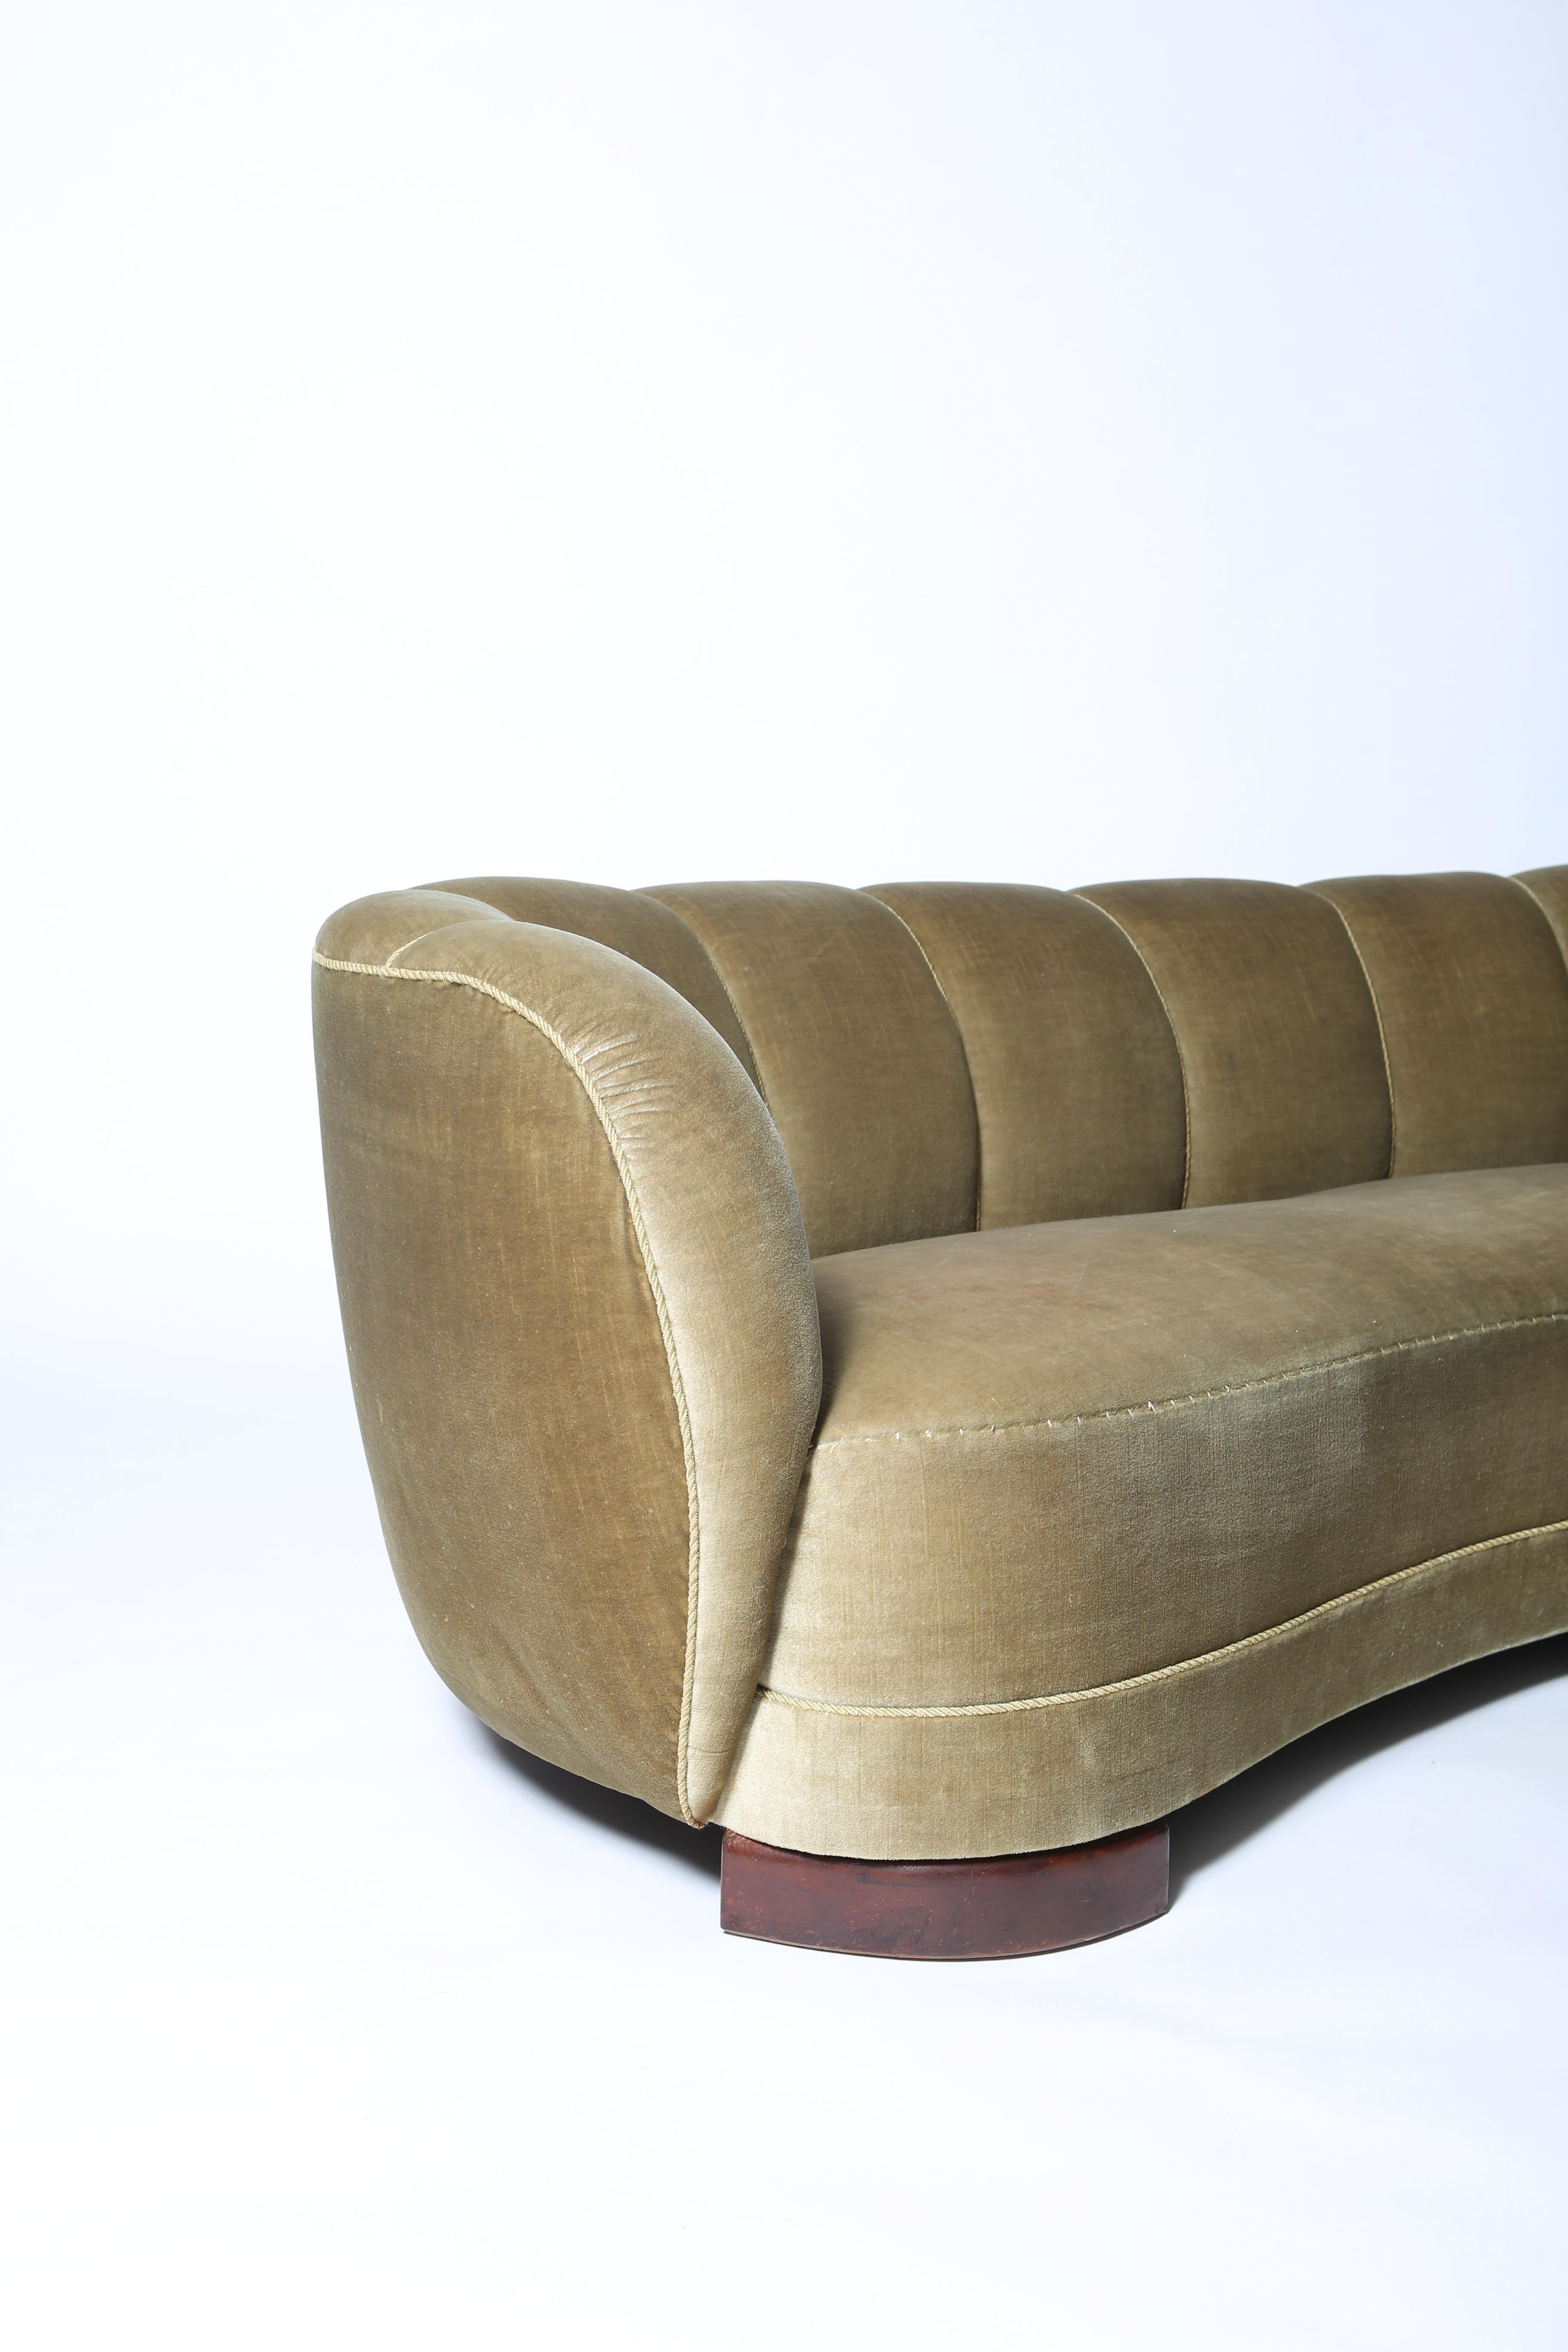 Danish Cabinetmaker-made classic curved “banana” sofa with original pale green mohair upholstery. Tailored channel-back is low-profile and elegantly curved with softly-rounded arms. Stained beech feet. Imported from Denmark. Very good condition.